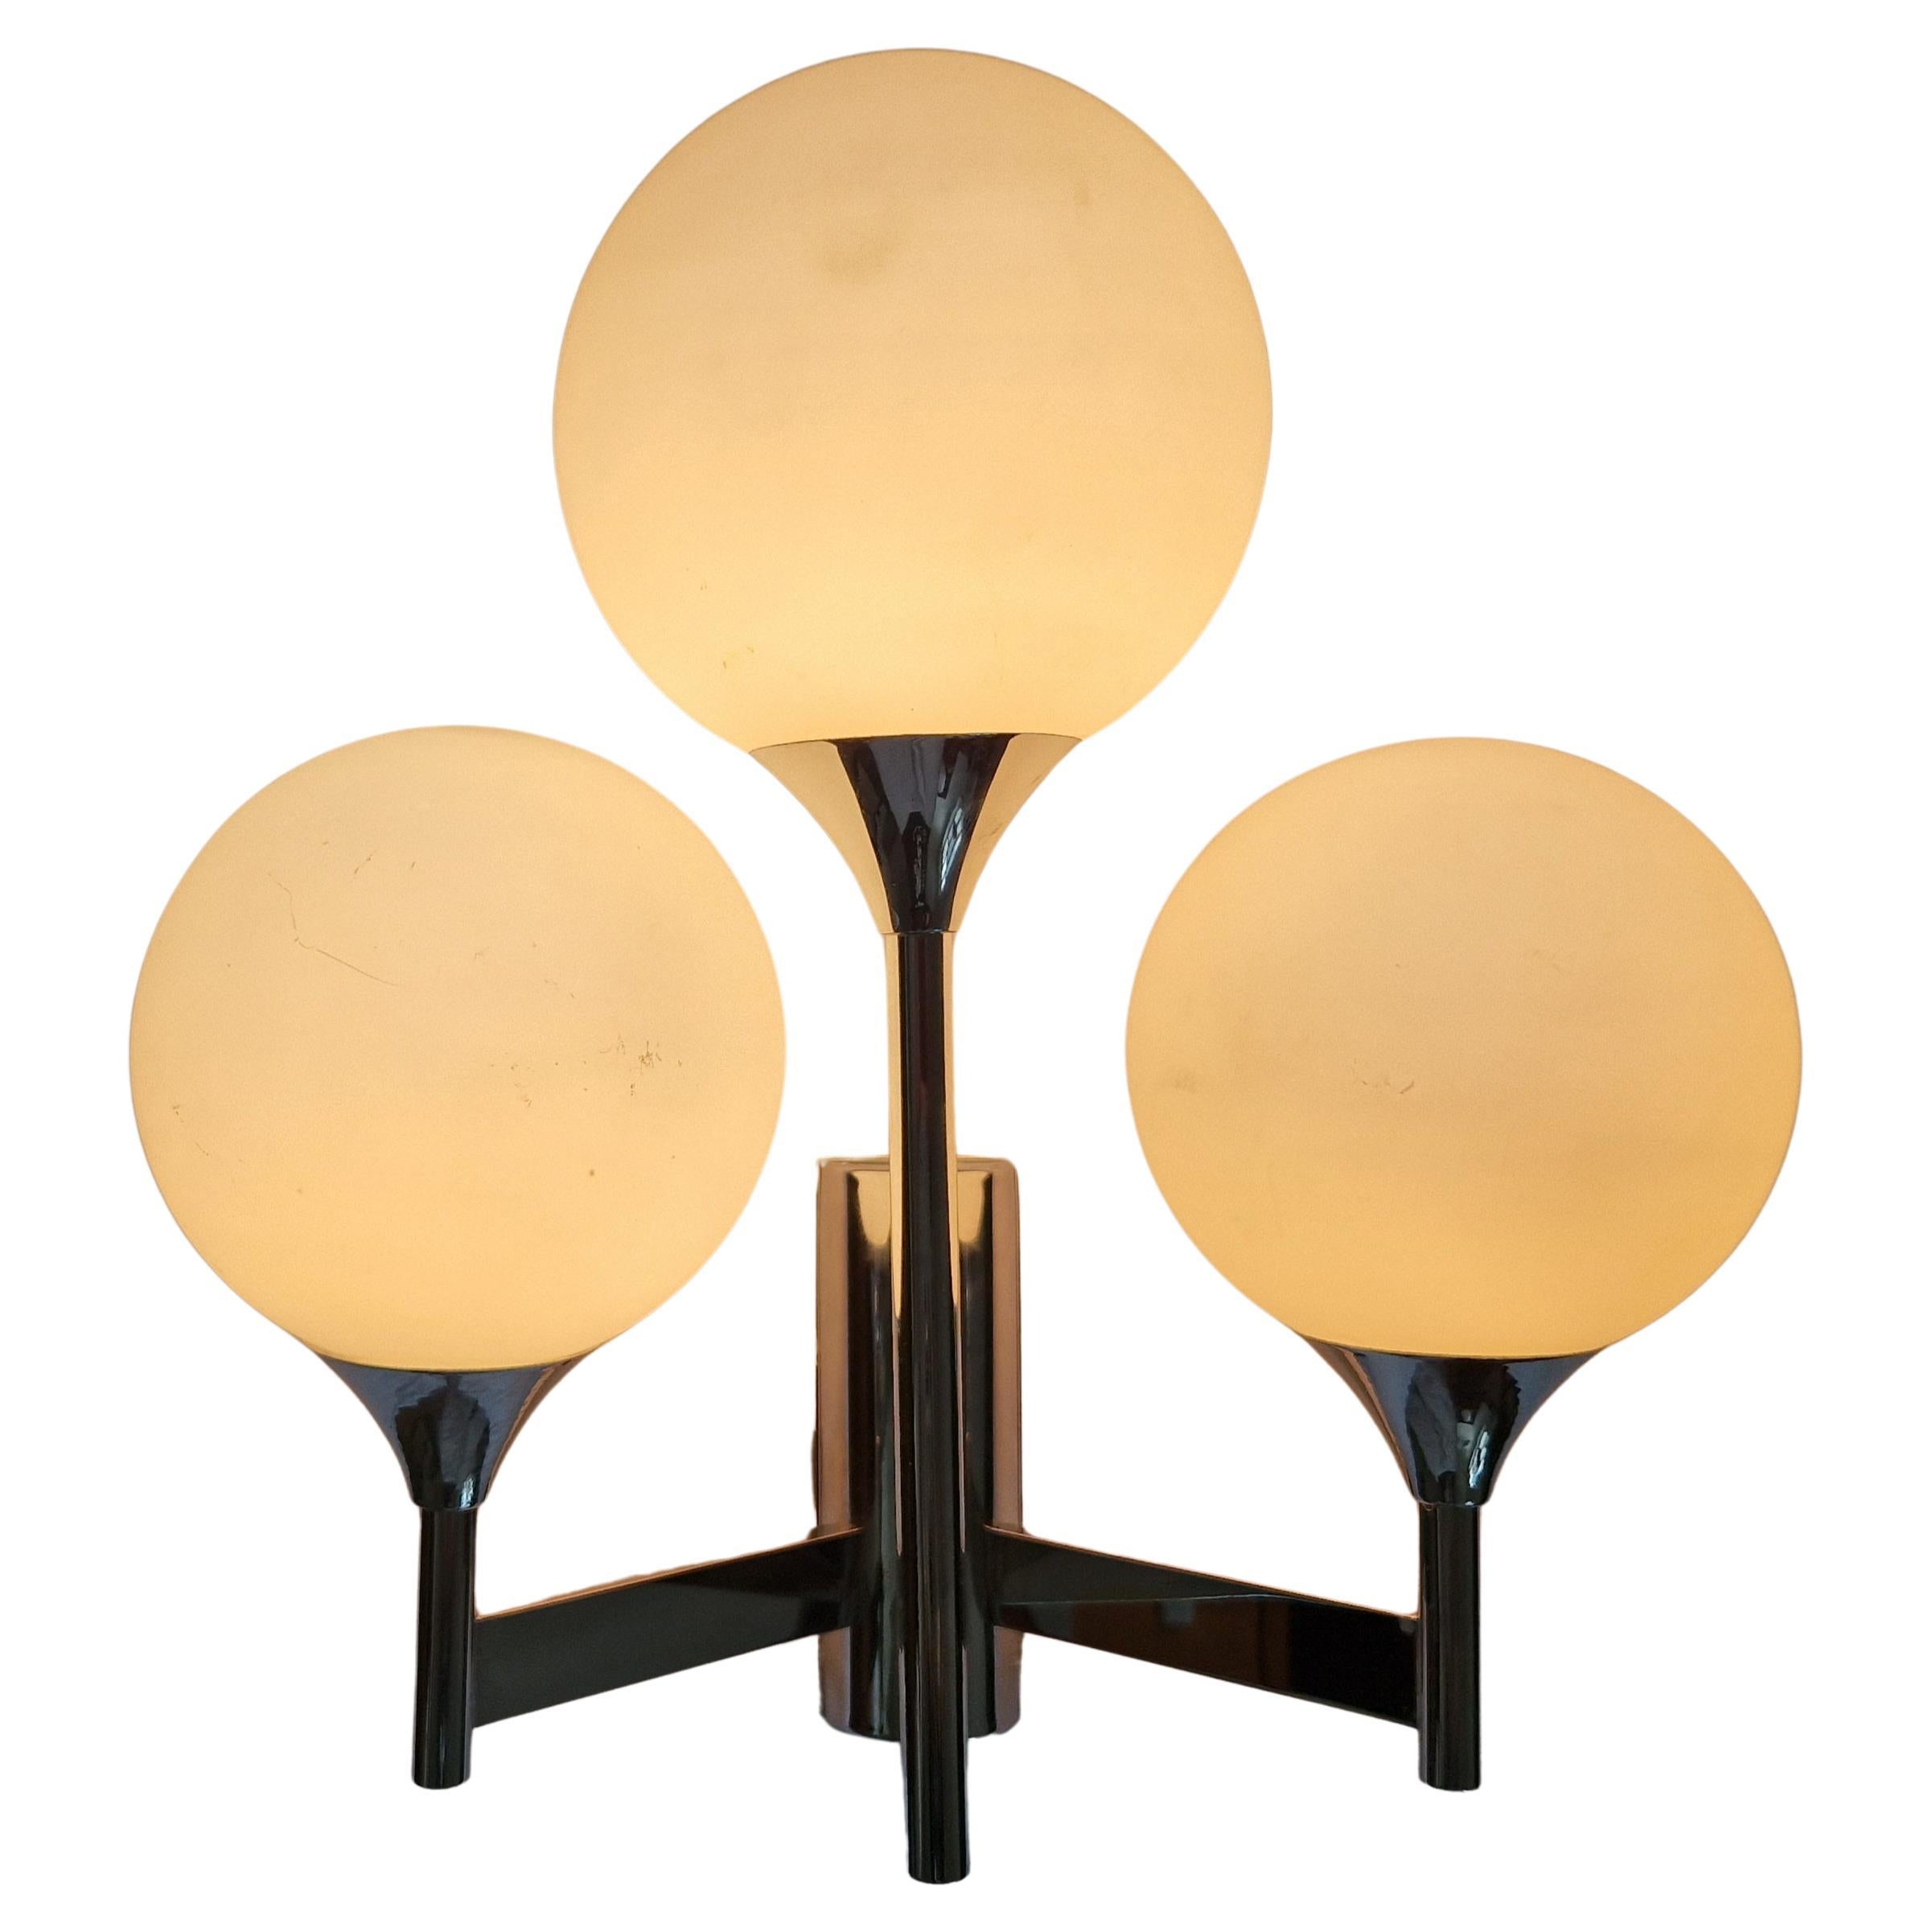 Midcentury Wall Lamp designed by Gaetano  For Sale